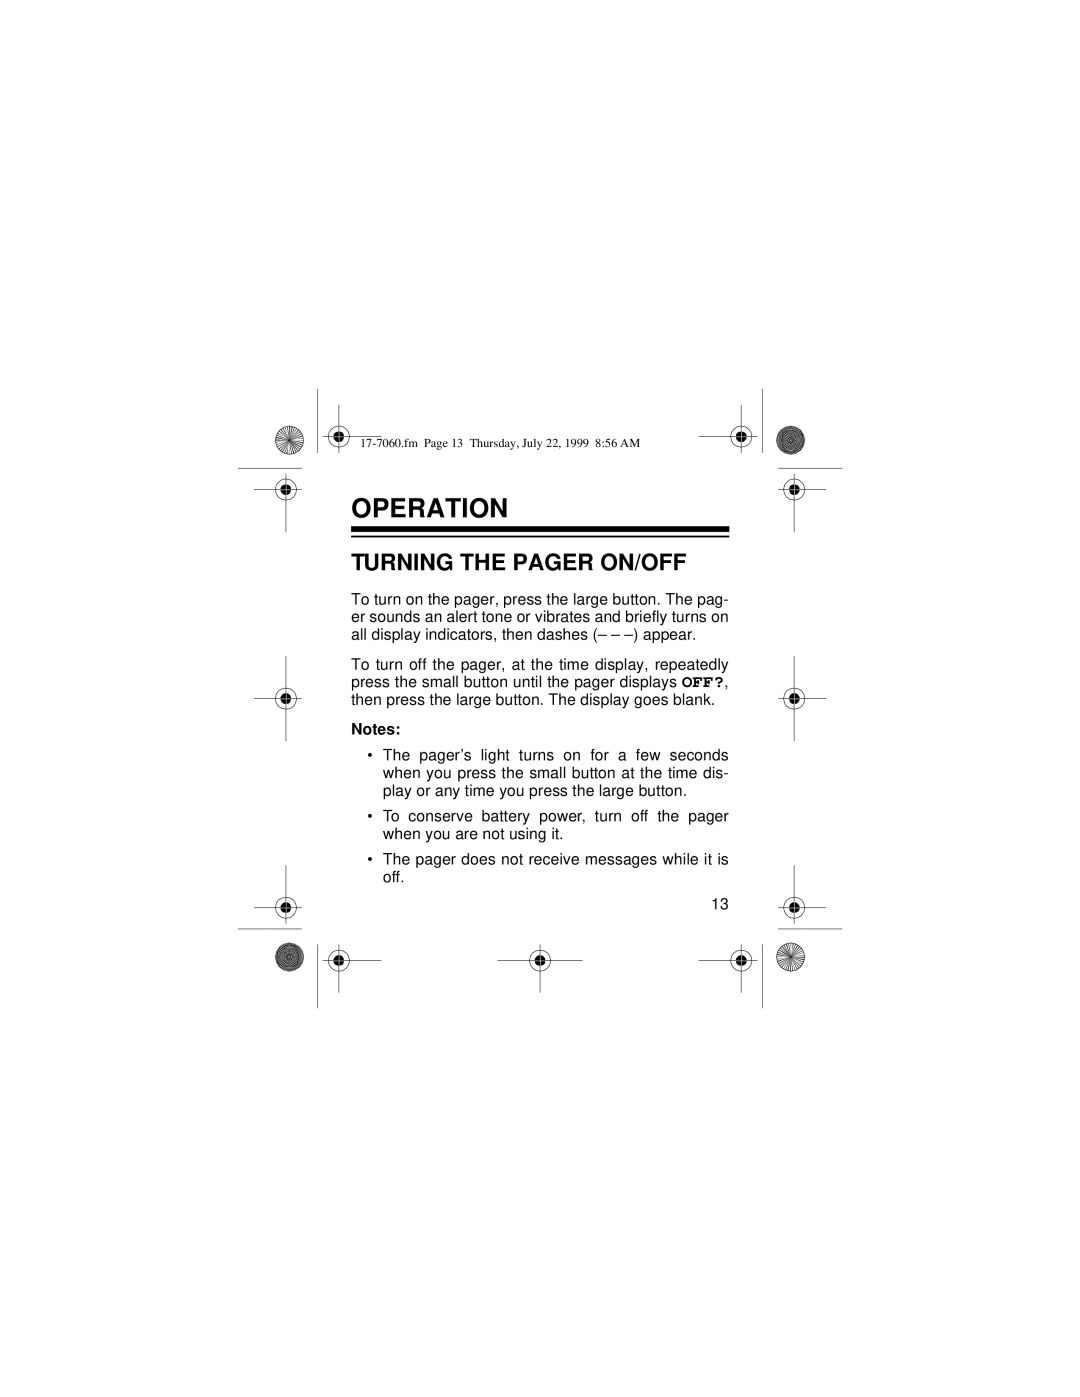 Radio Shack 17-7060, 17-7040 owner manual Operation, Turning The Pager On/Off 